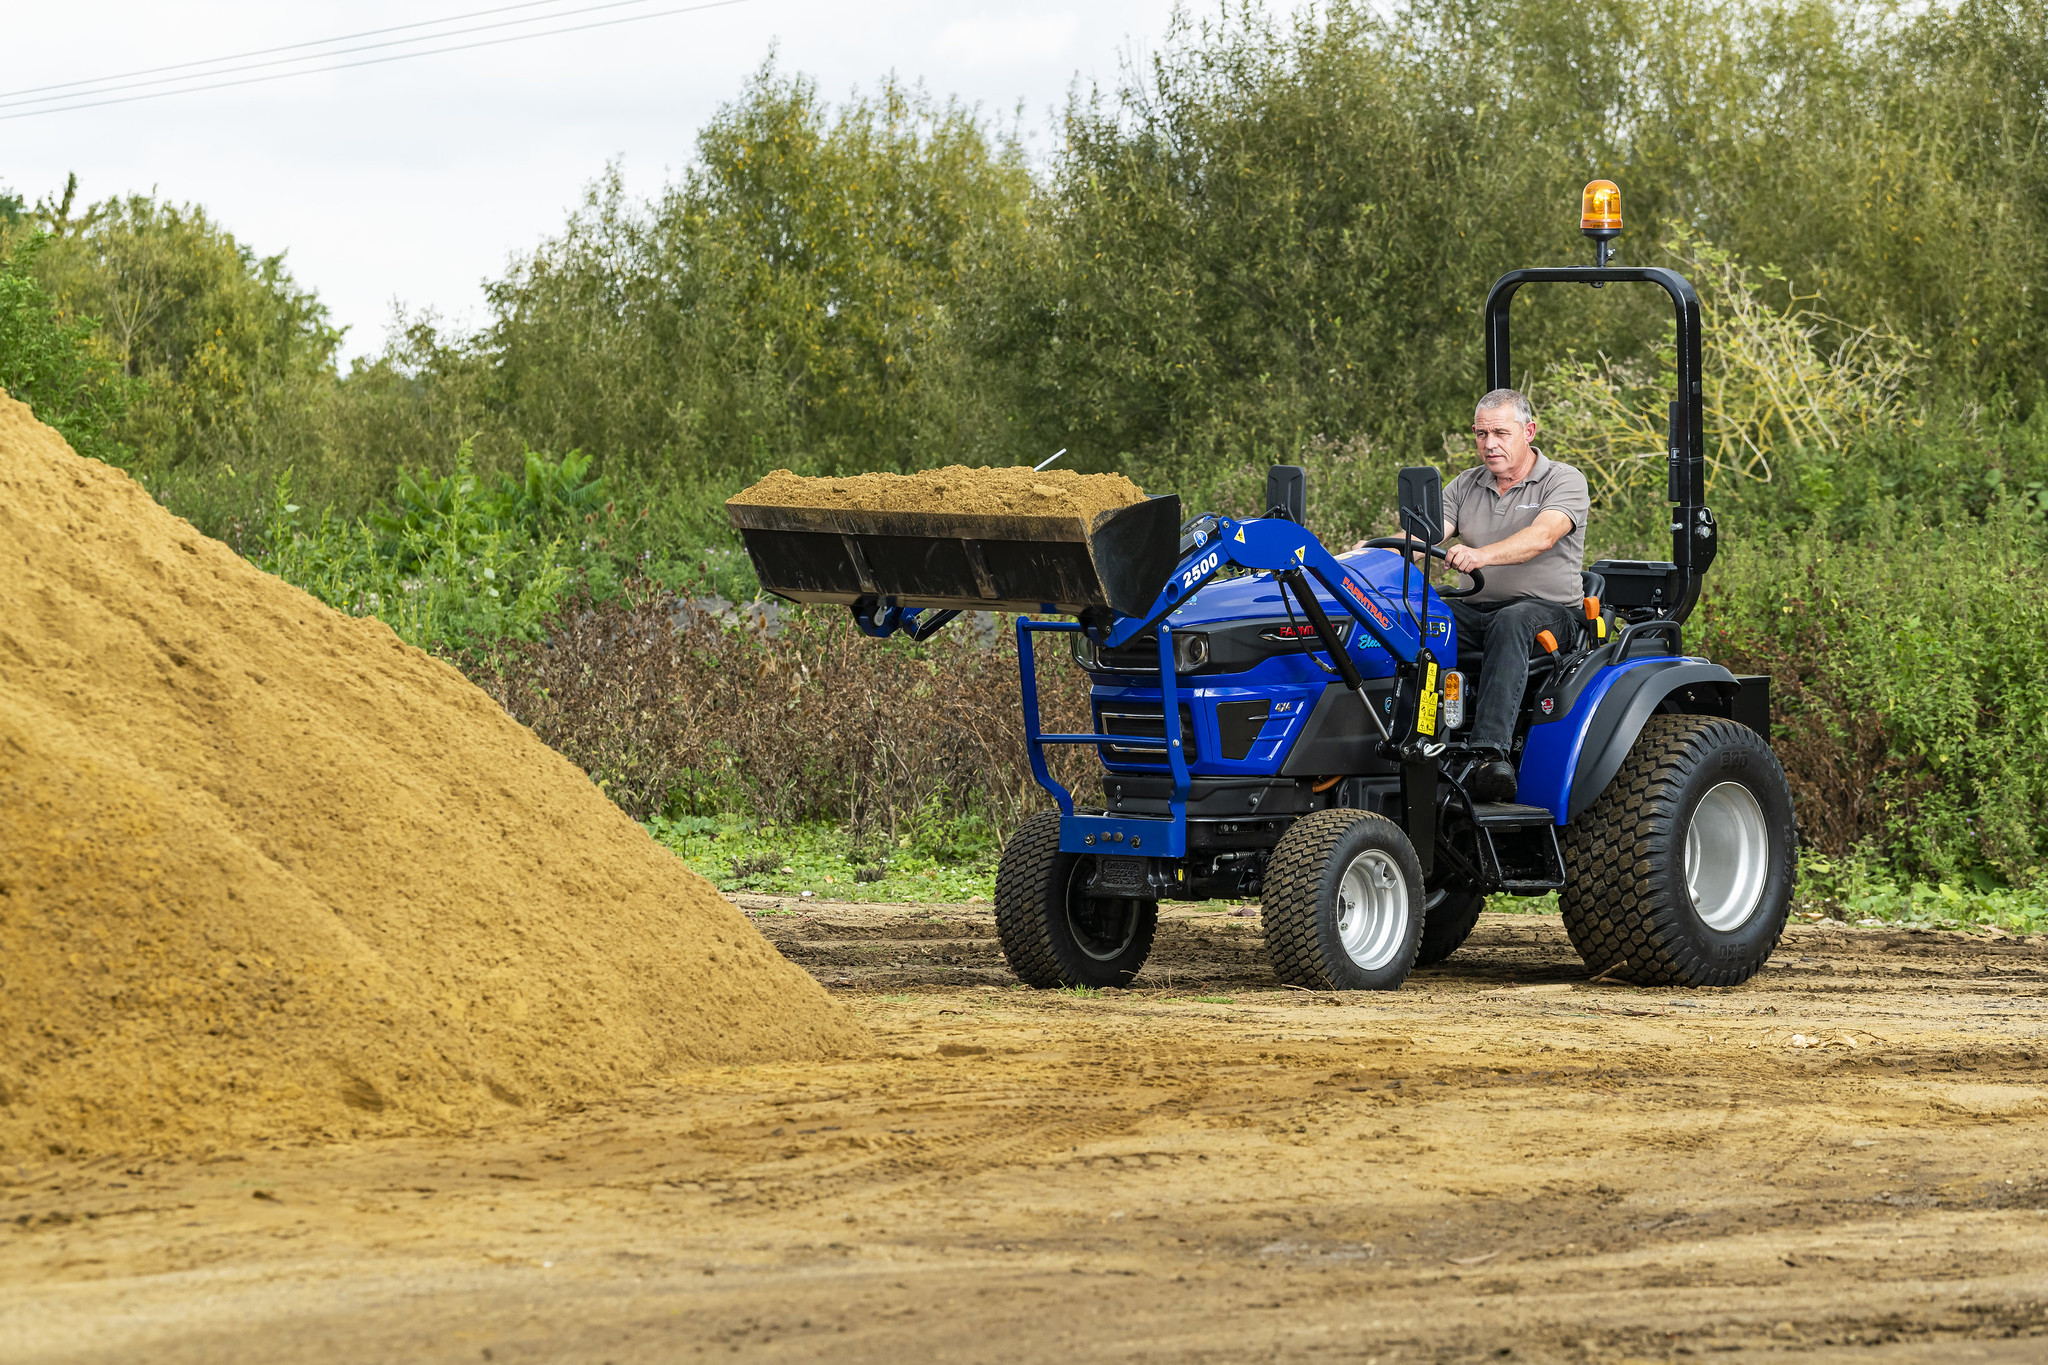 The Farmtrac FT25G being used to transport sand in a front-loader attachment.